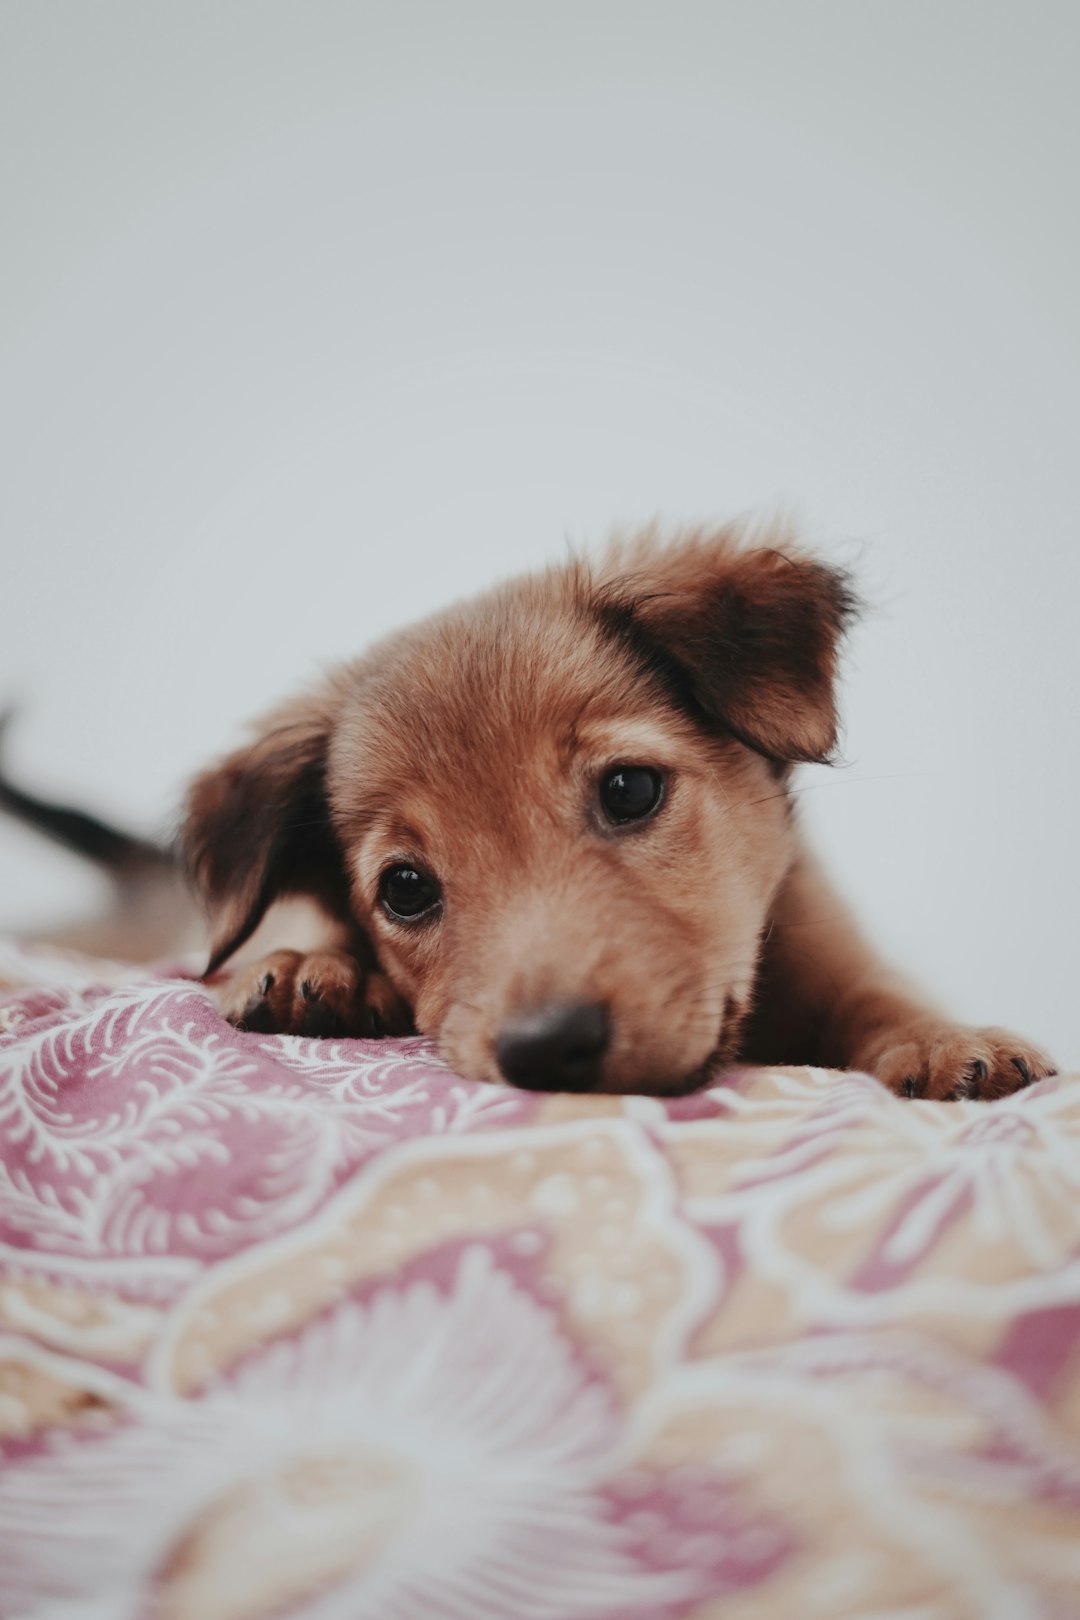 Puppy on a bed - making the lifetime commitment to a pet